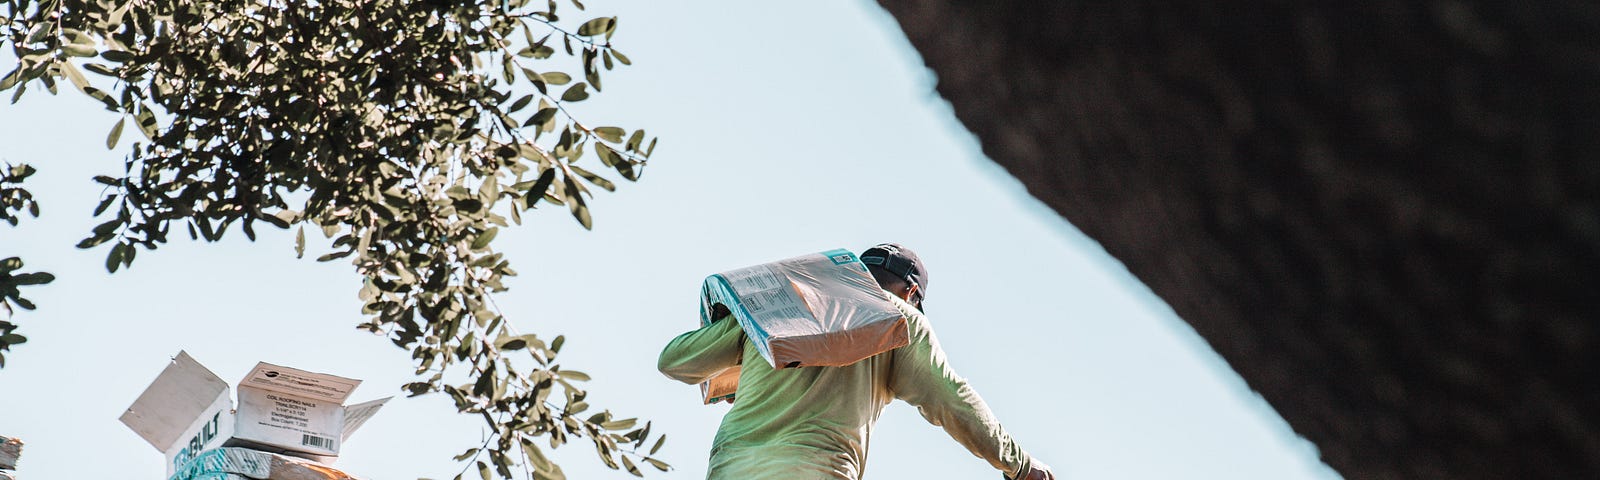 A man carries a bundle on a roof